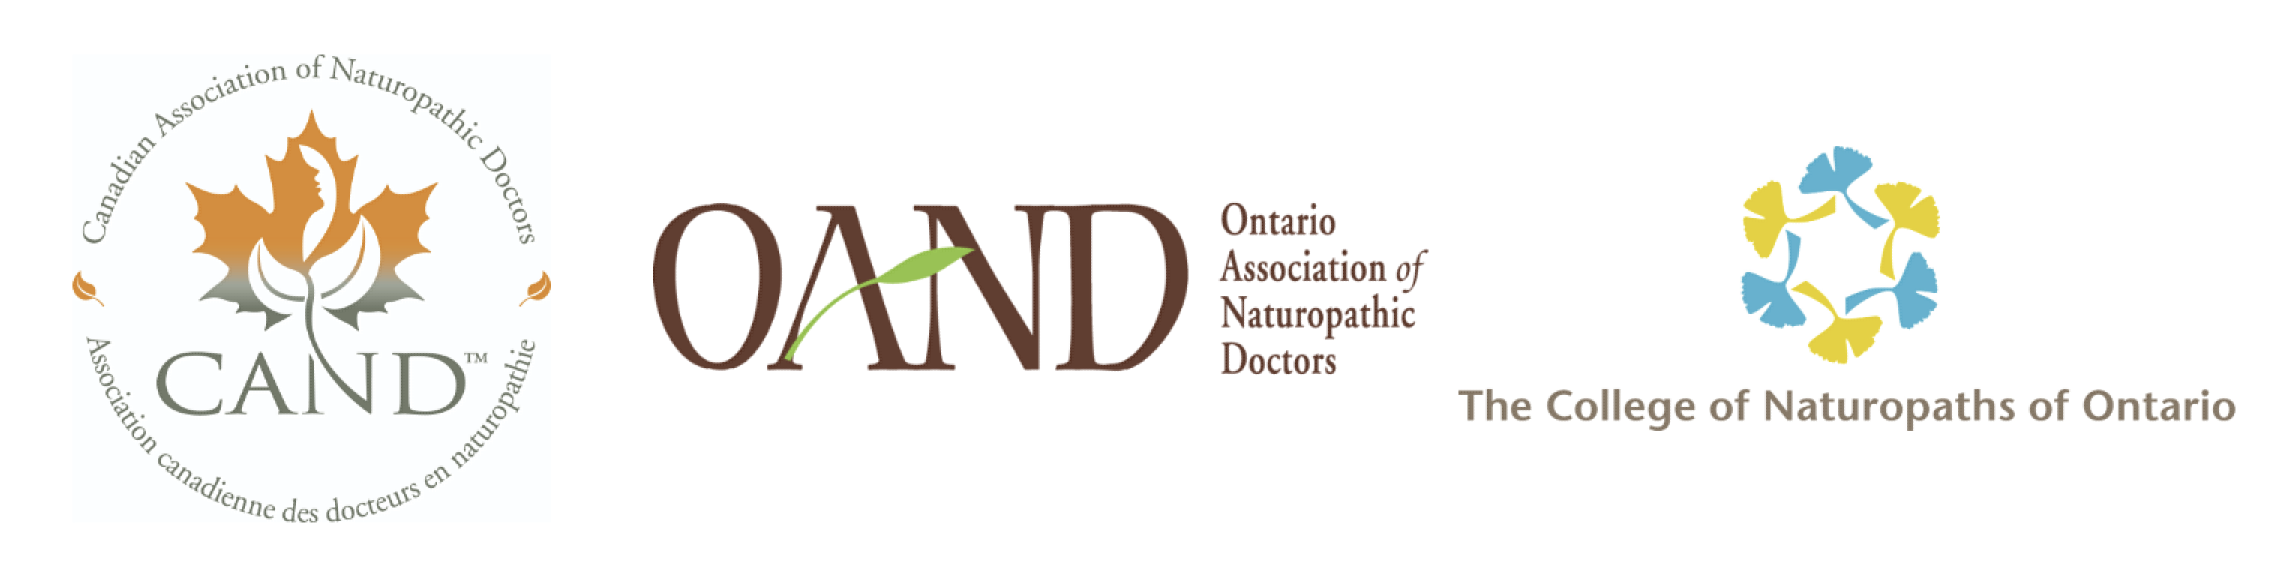 canadian and ontario association of naturopathic doctors, college of naturopaths ontario regulatory boards